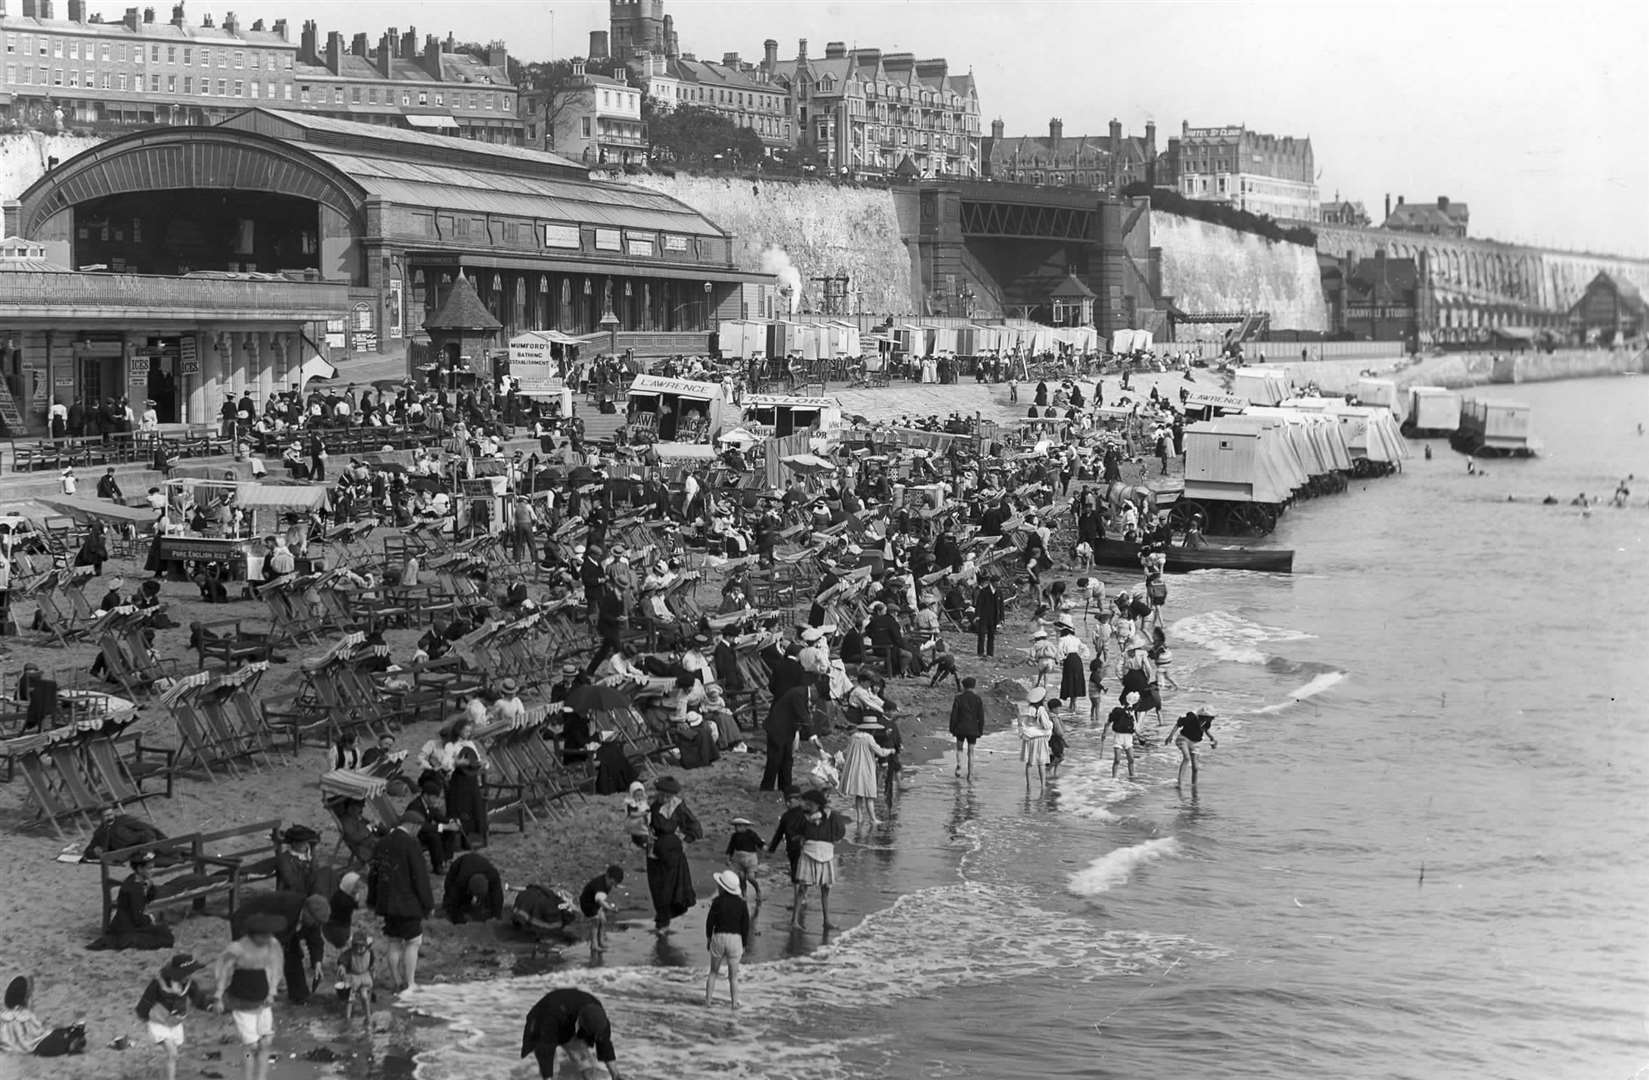 The Ramsgate Harbour station looms in the background as people pack the beach with deck chairs